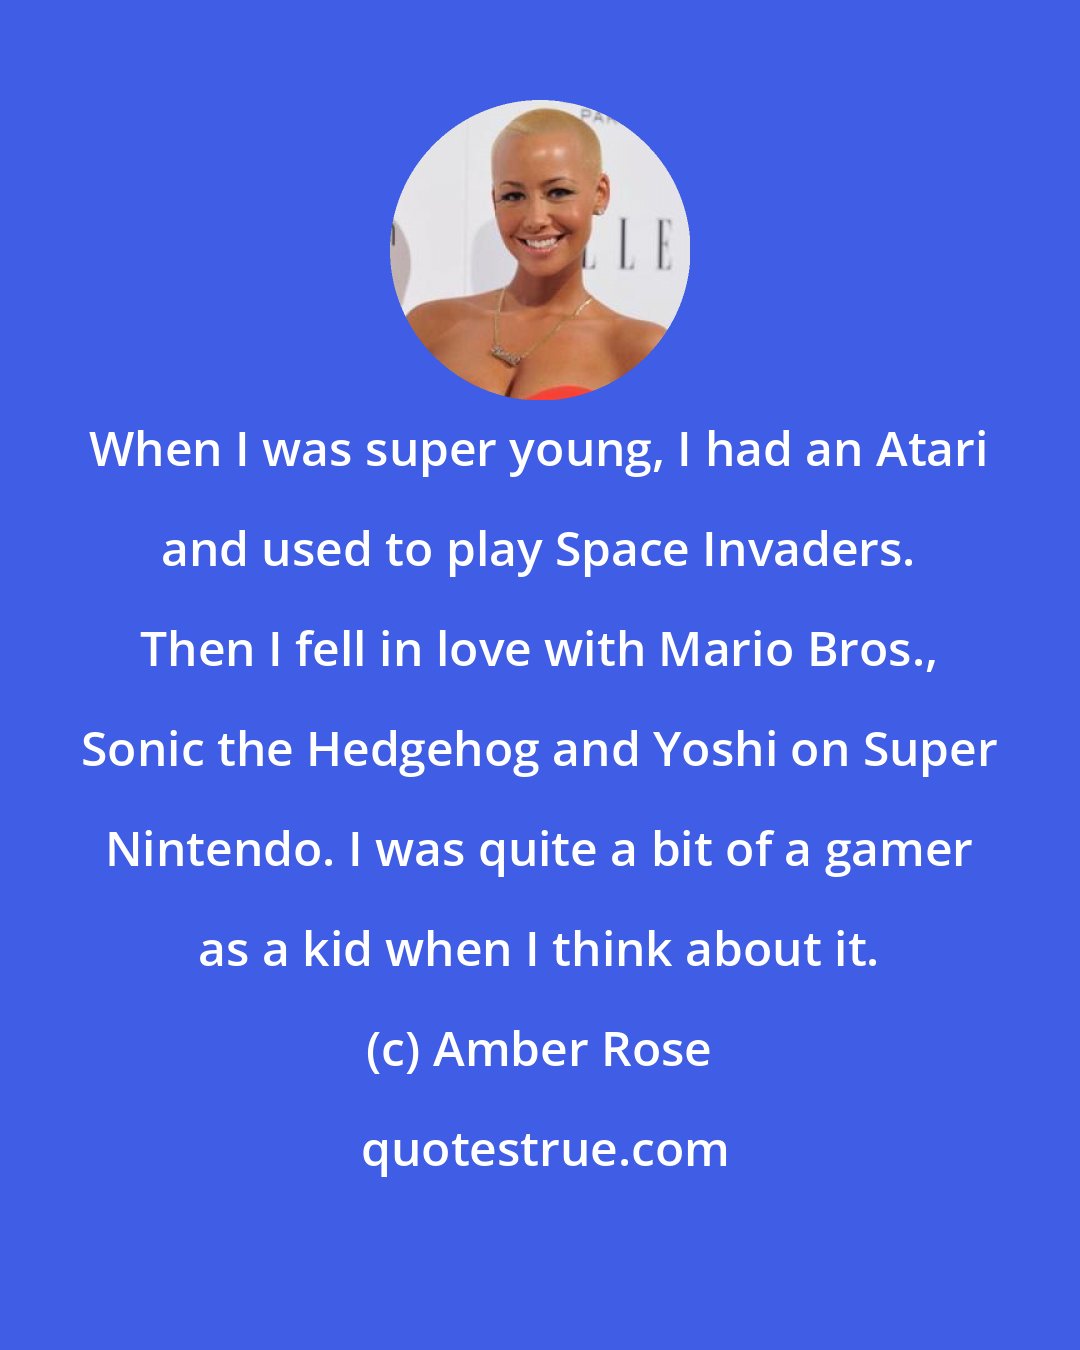 Amber Rose: When I was super young, I had an Atari and used to play Space Invaders. Then I fell in love with Mario Bros., Sonic the Hedgehog and Yoshi on Super Nintendo. I was quite a bit of a gamer as a kid when I think about it.